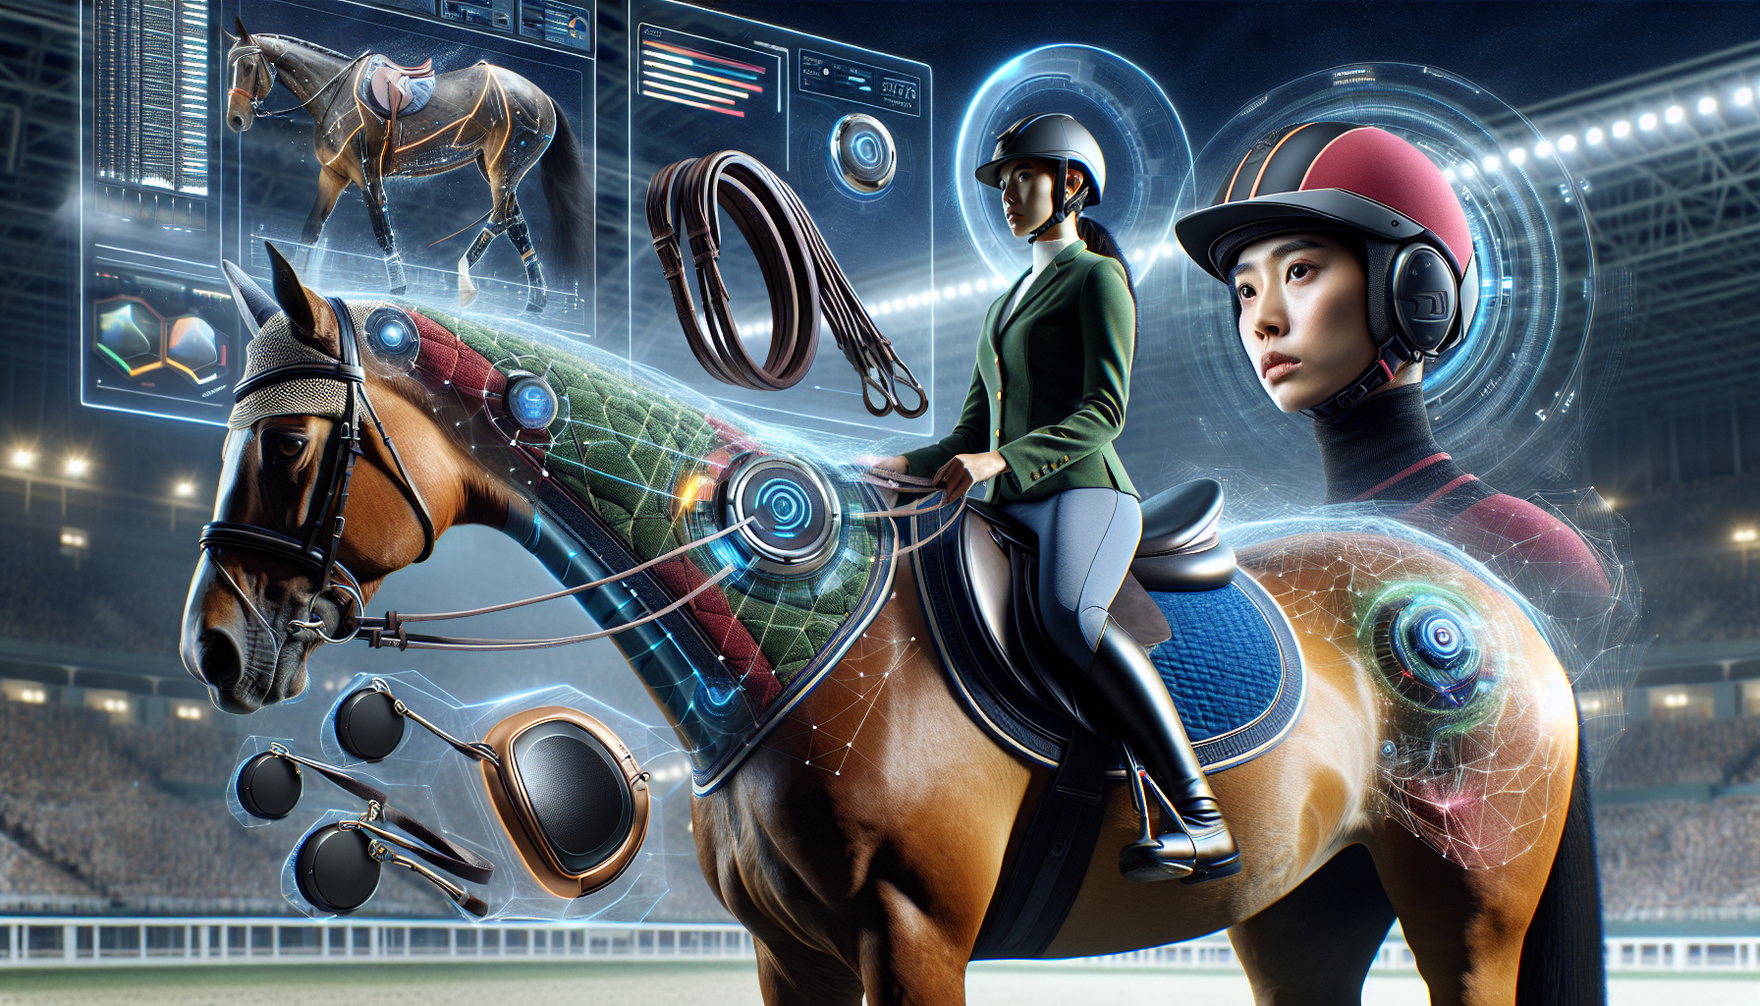 Depict an intriguing blend of traditional equestrian gear with modern technology. Imagine a horse with its sleek, high-tech saddle equipped with sensor-based systems for performance tracking. Think of